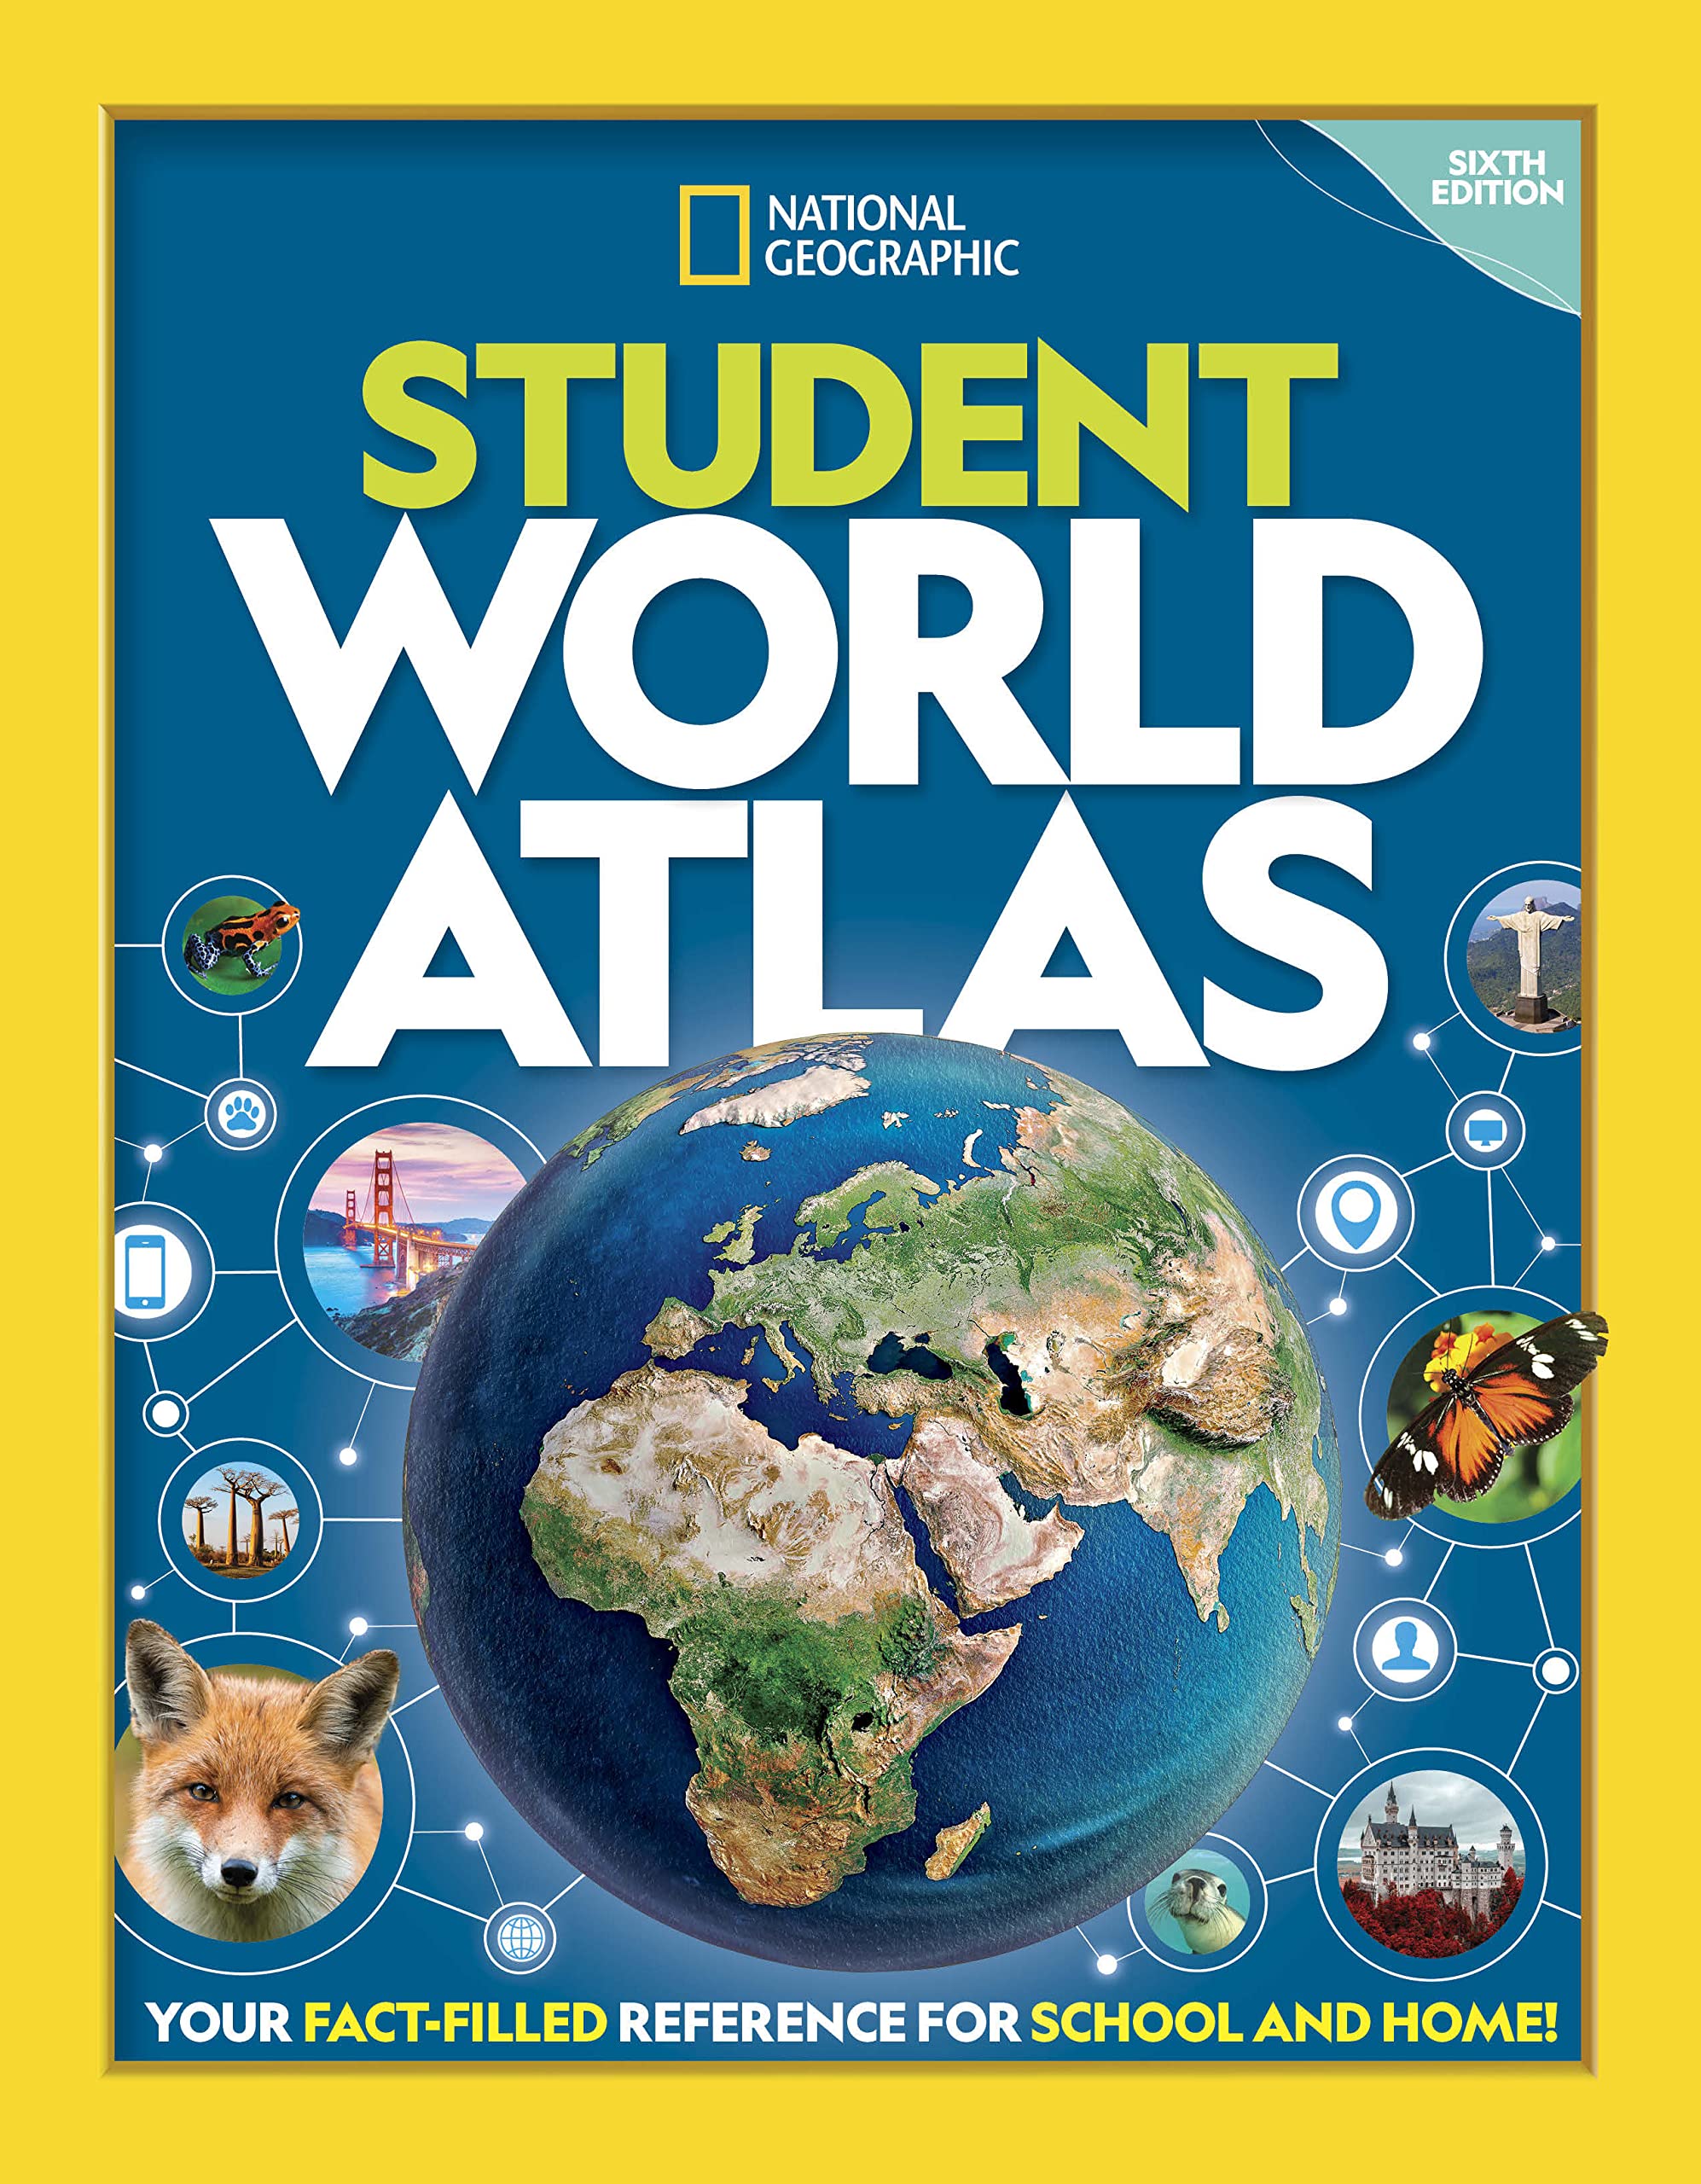 Student World Atlas by National Geographic